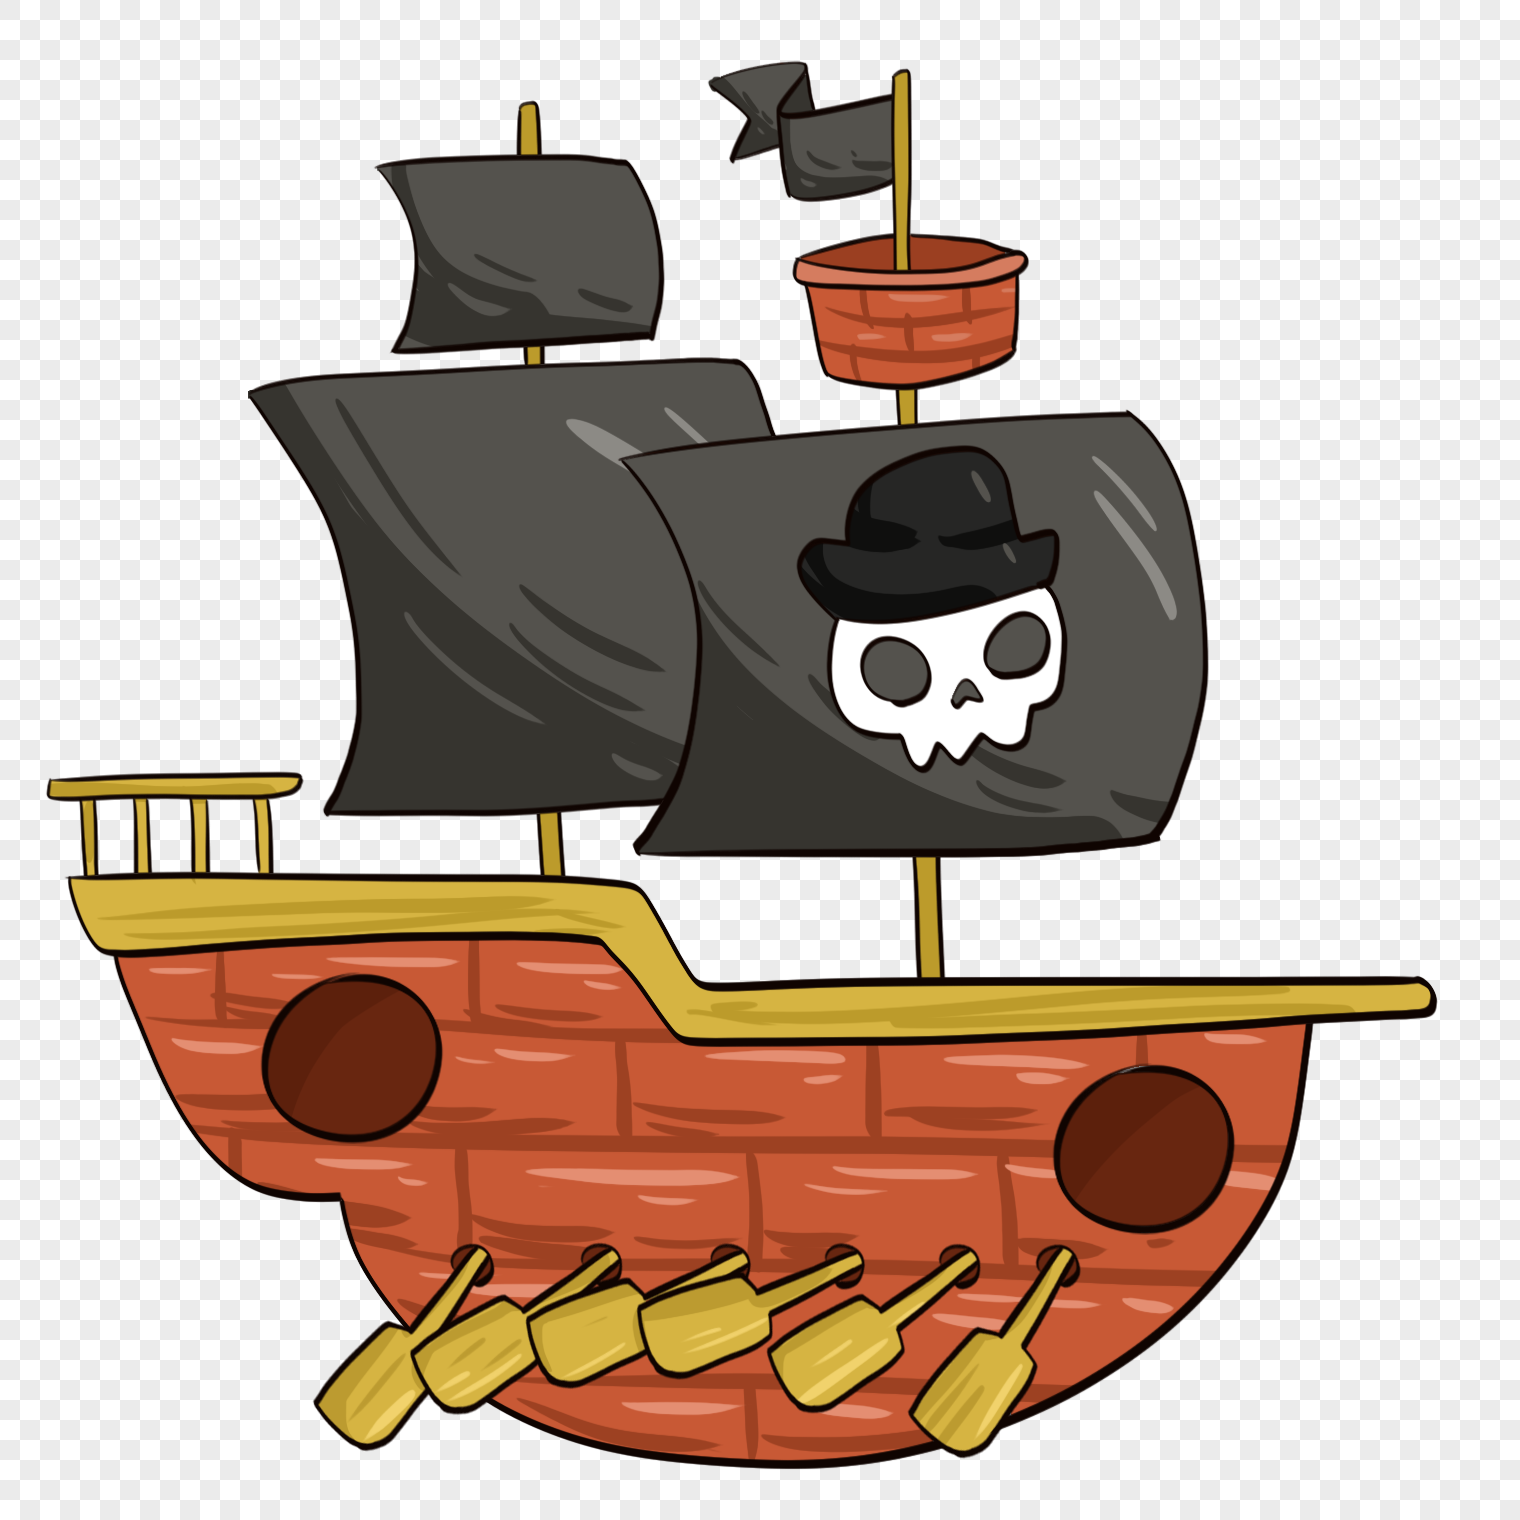 Pirate Boat PNG Images With Transparent Background | Free Download On ...